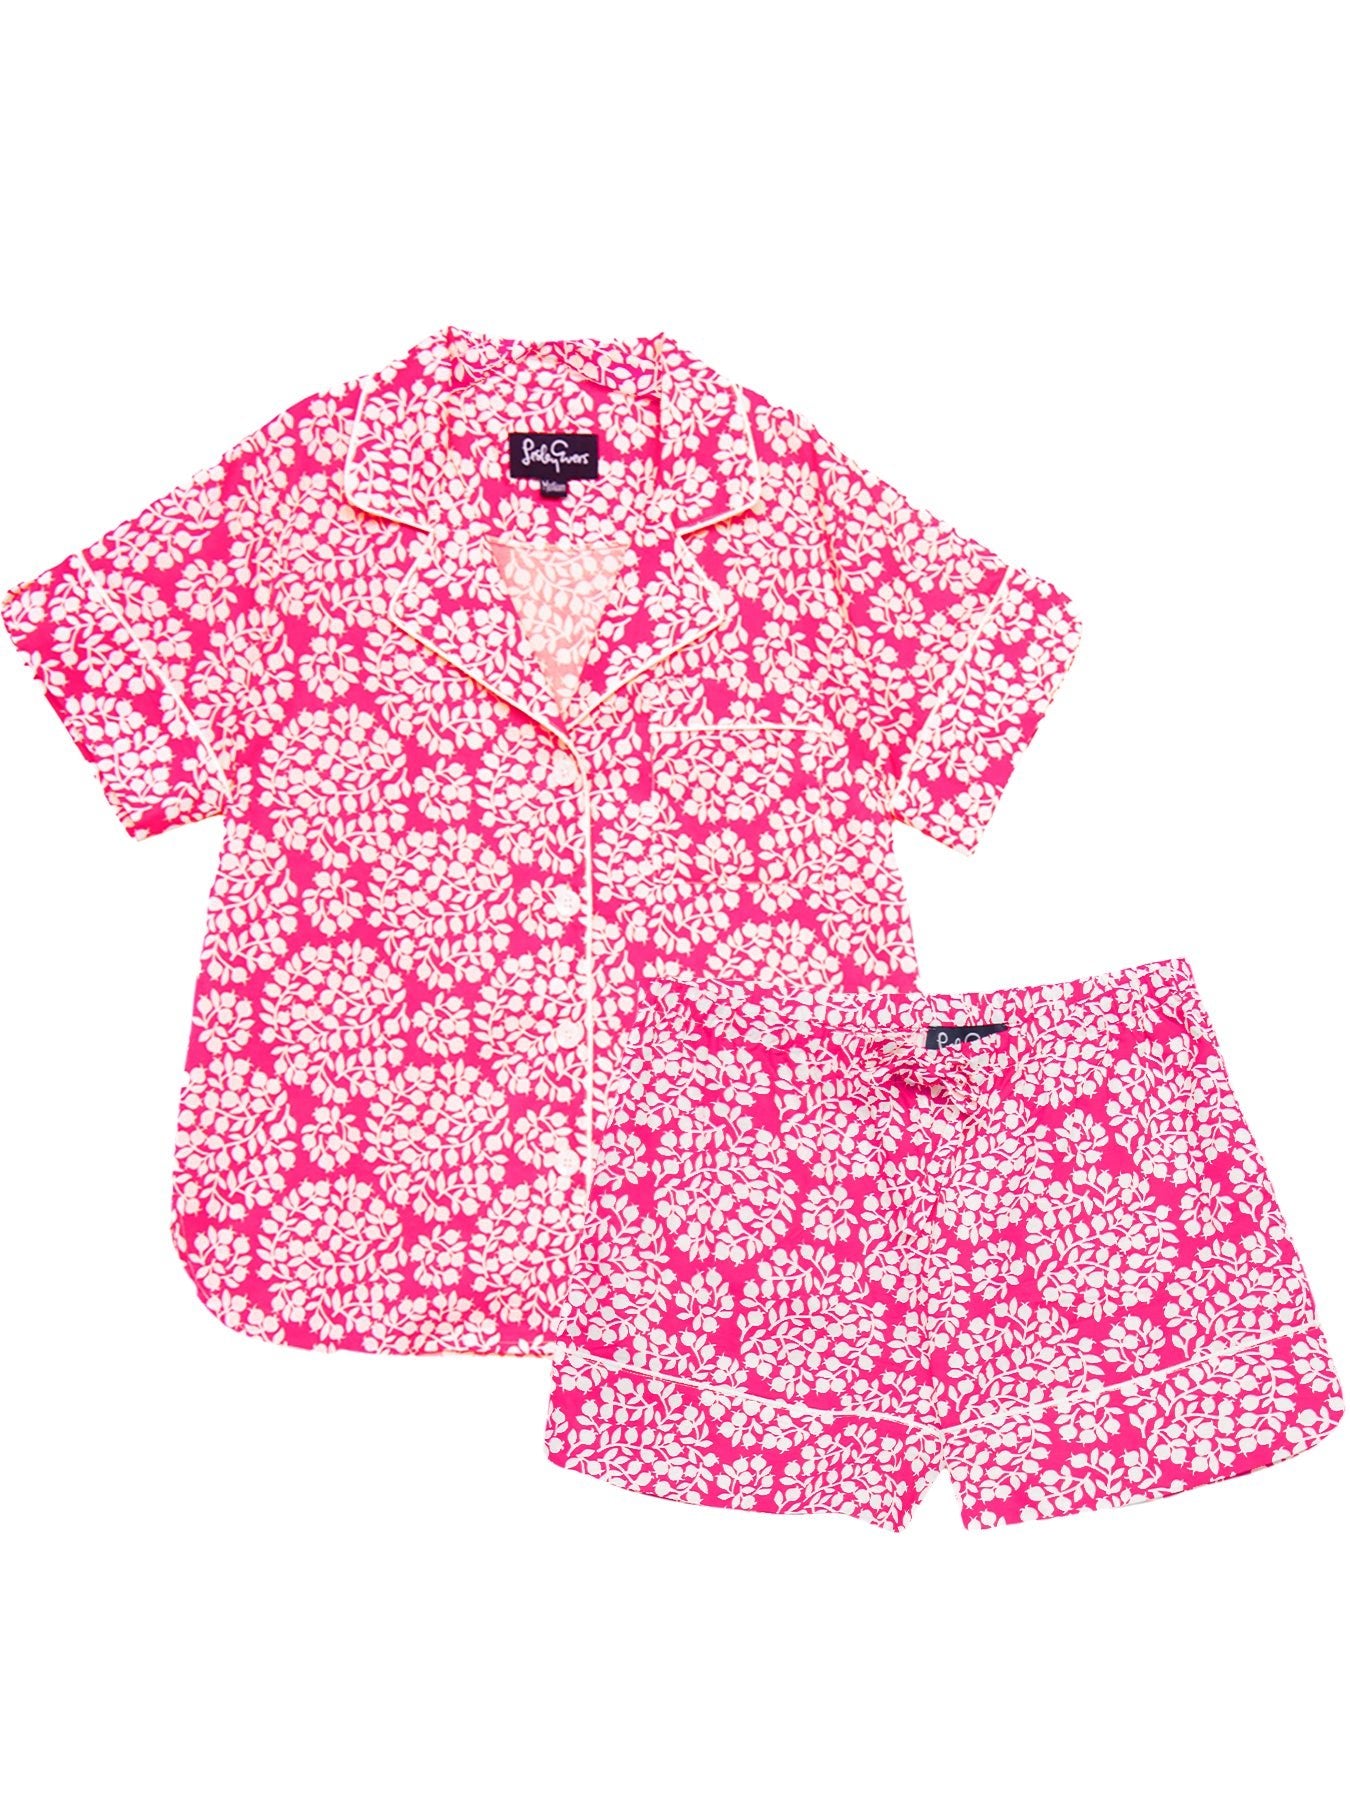 ZOEY pajama set Flower Ball Pink - Lesley Evers-cotton PJs-flower ball-flower ball pink